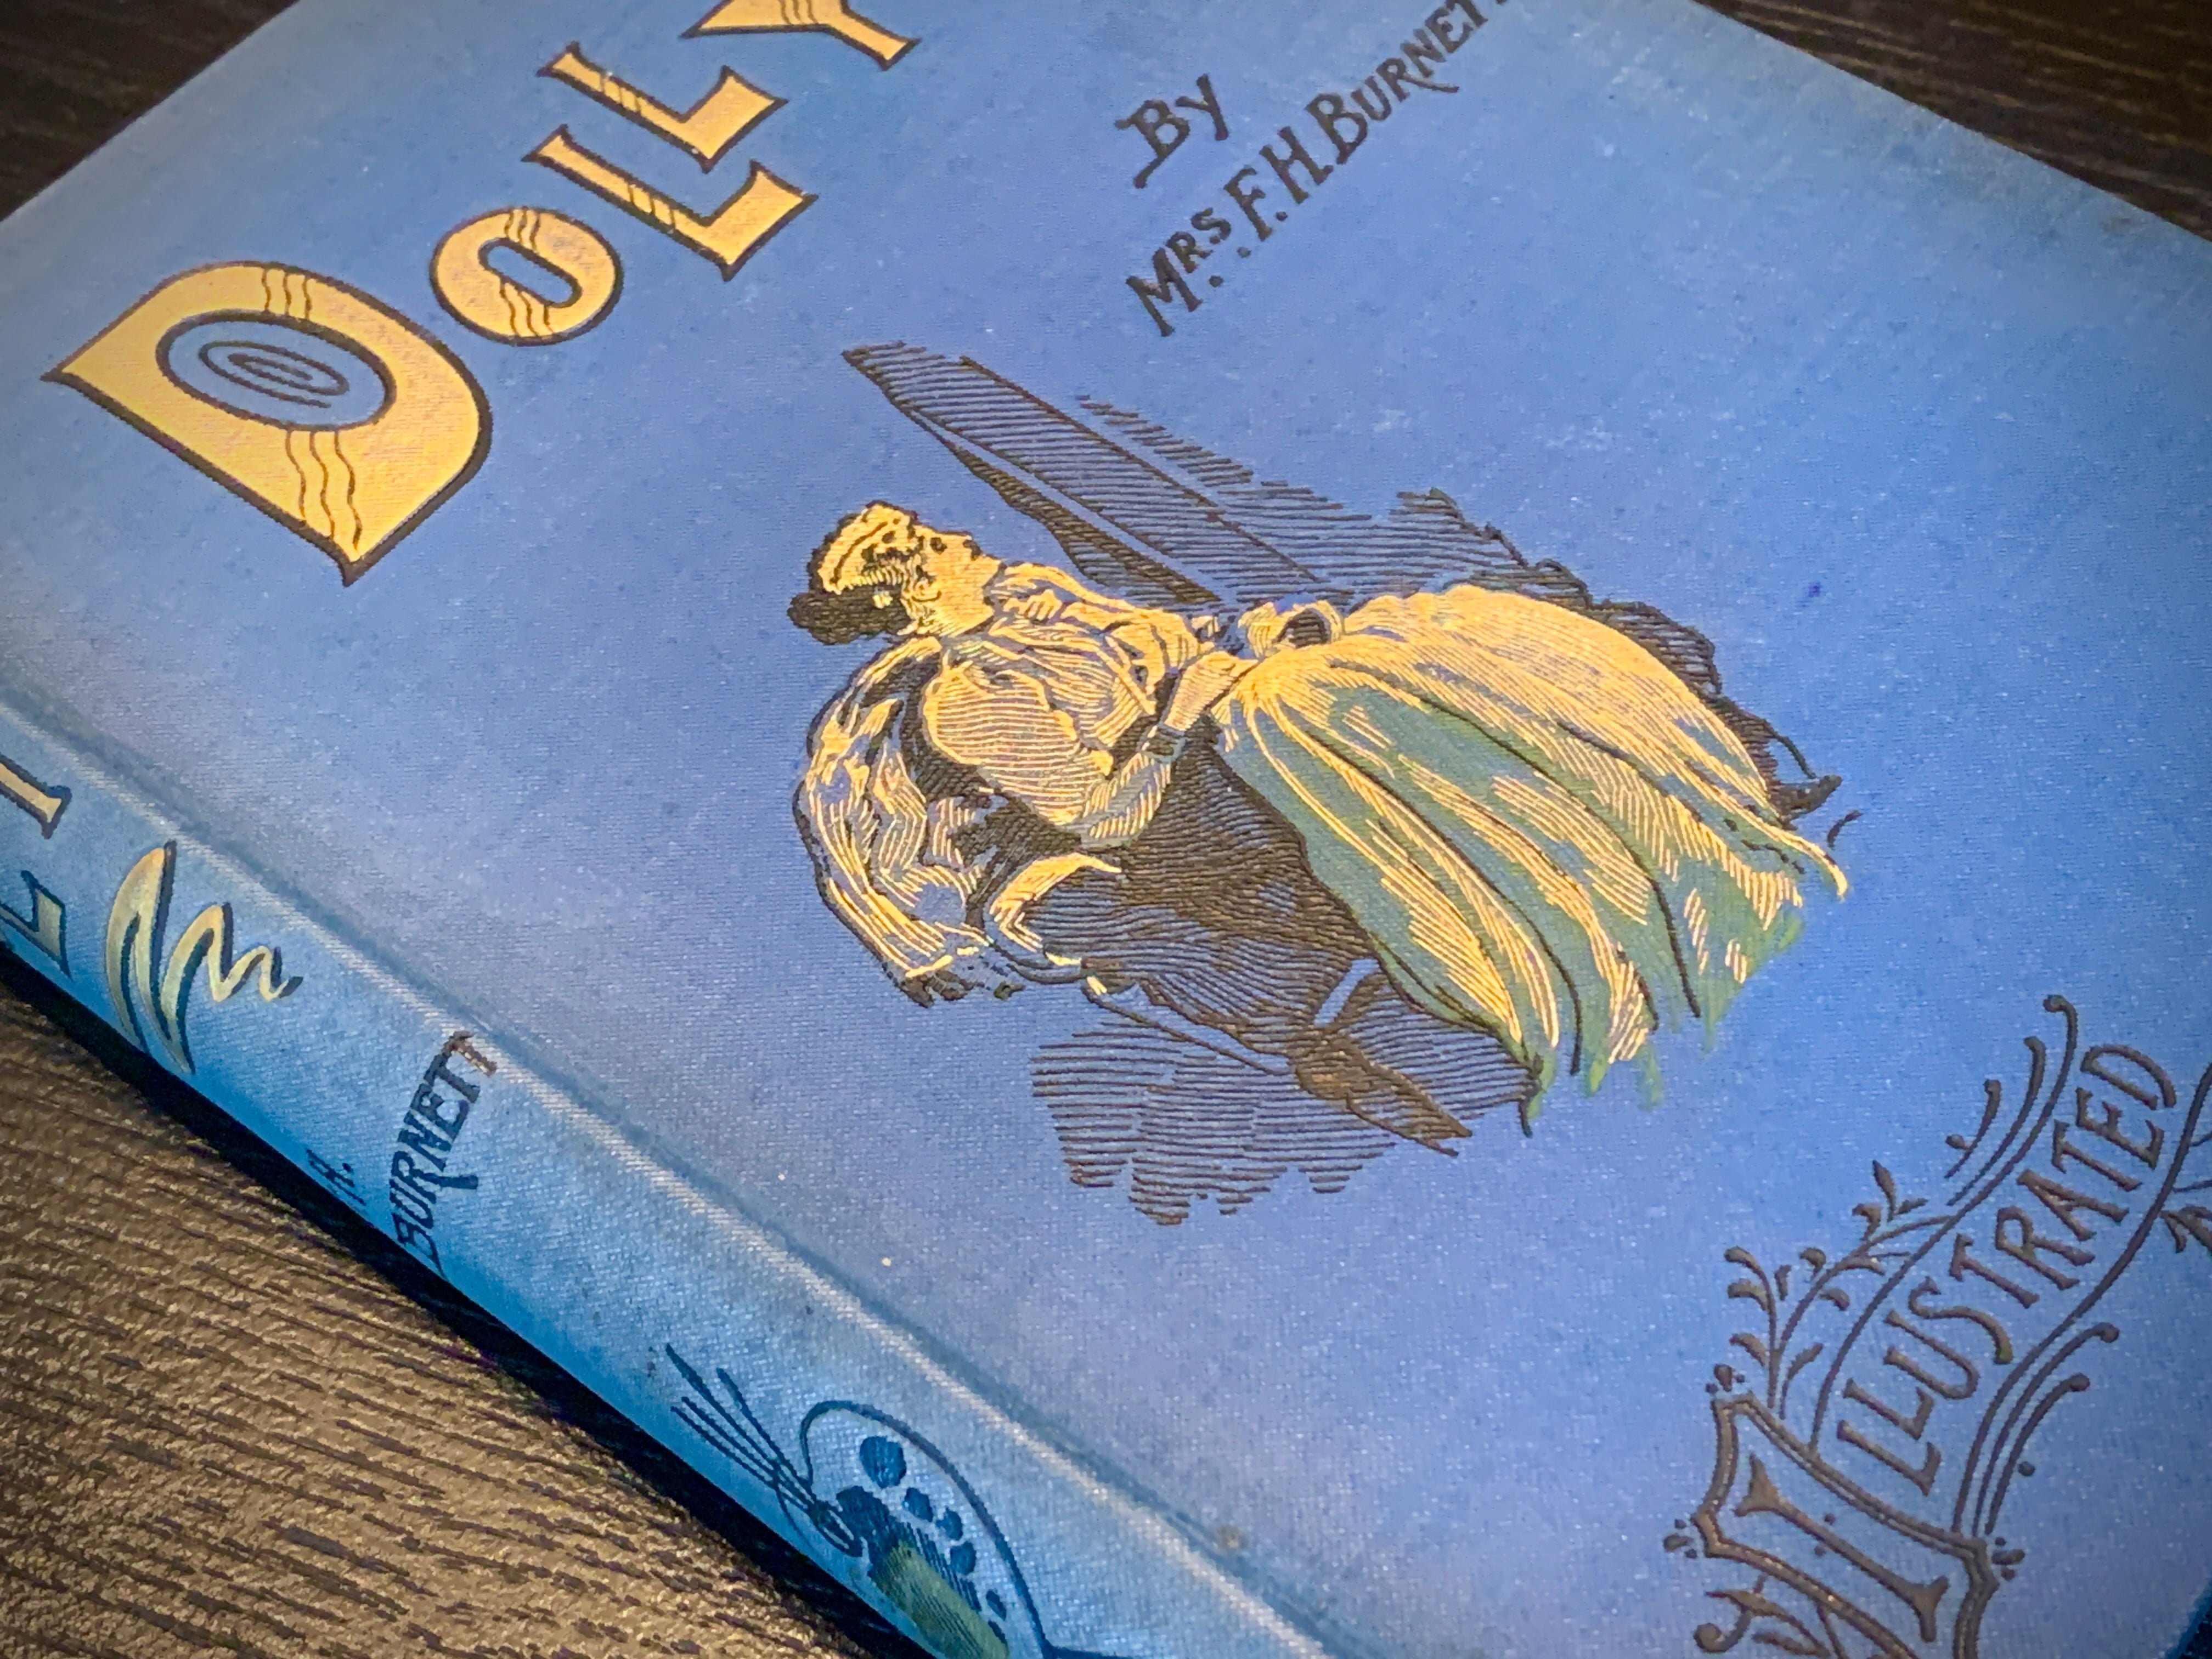 Dolly by Frances Hodgson Burnett, Illustrated by Ludlow, 1893